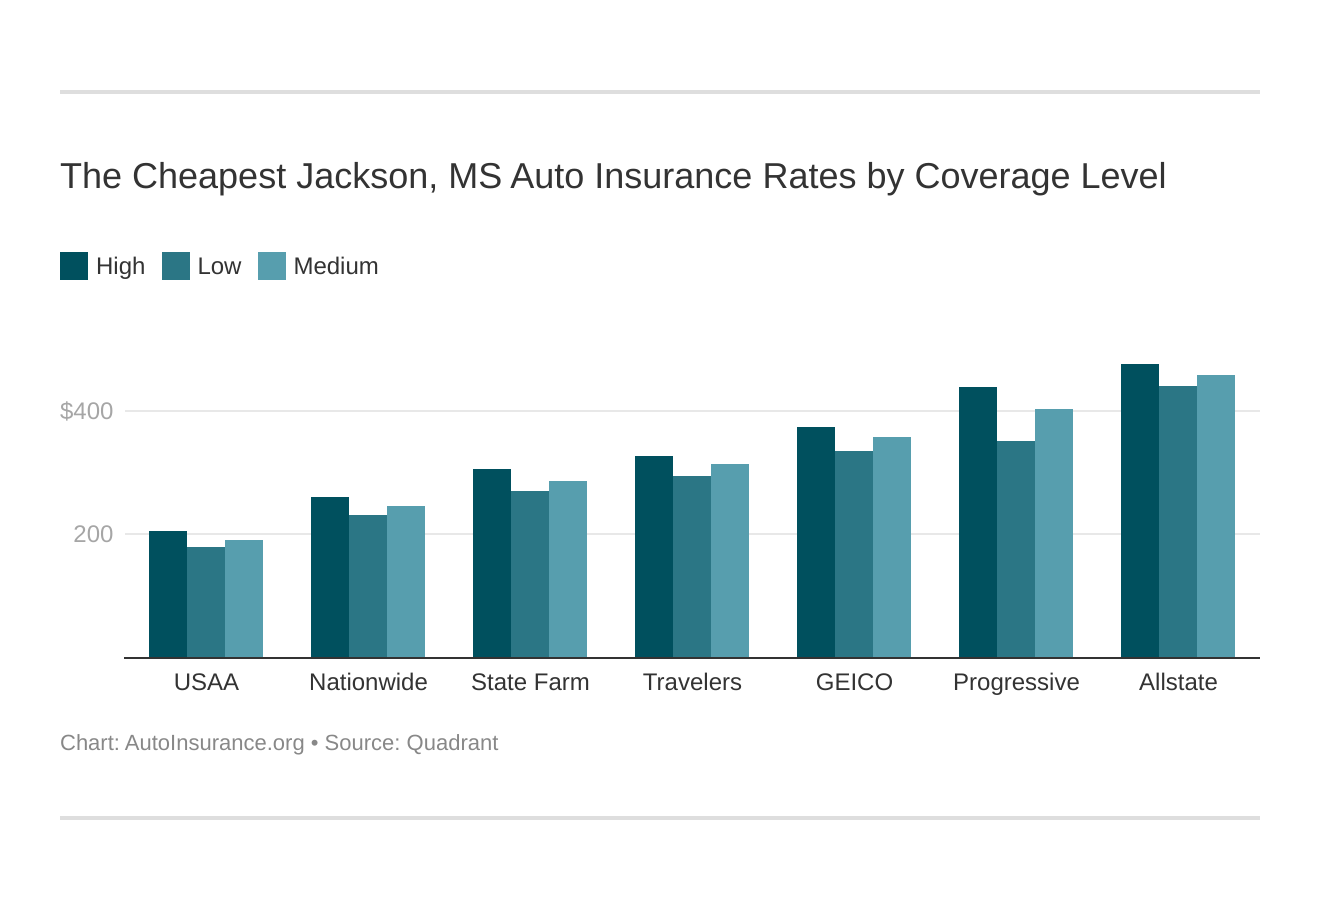 The Cheapest Jackson, MS Auto Insurance Rates by Coverage Level